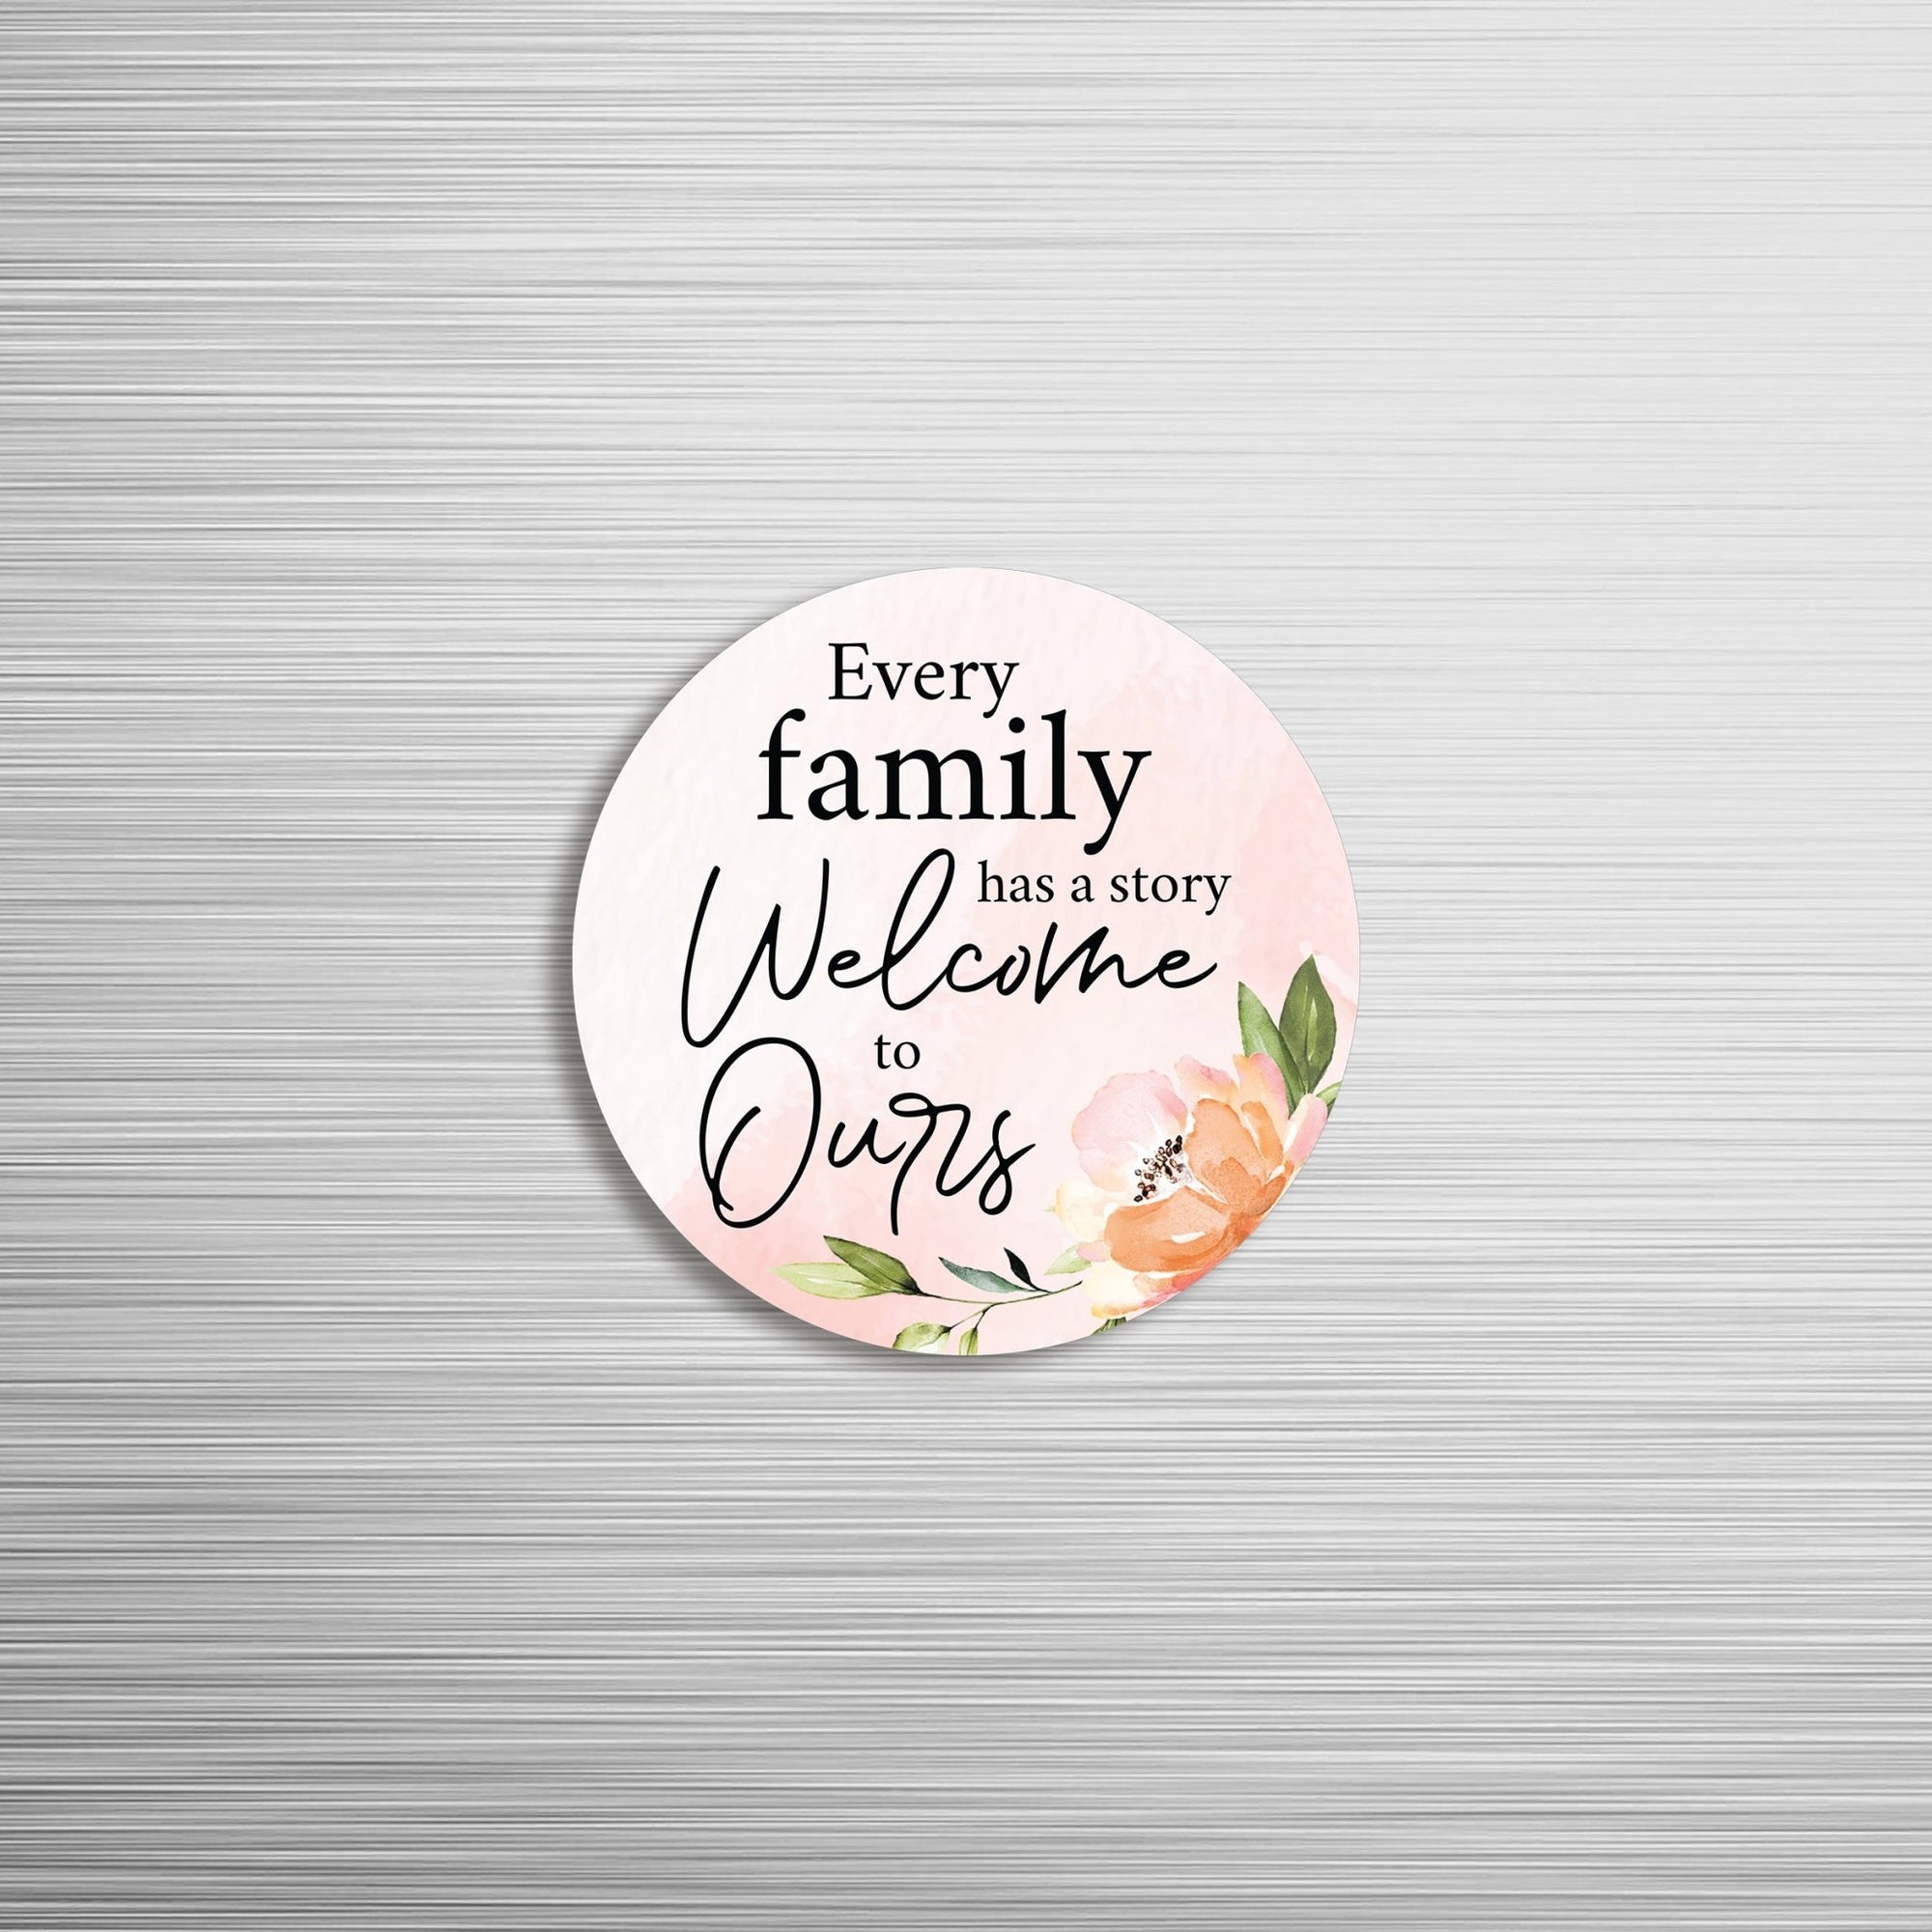 Family & Home Round Refrigerator Magnet Perfect Gift Idea For Home Décor - Every Family - LifeSong Milestones